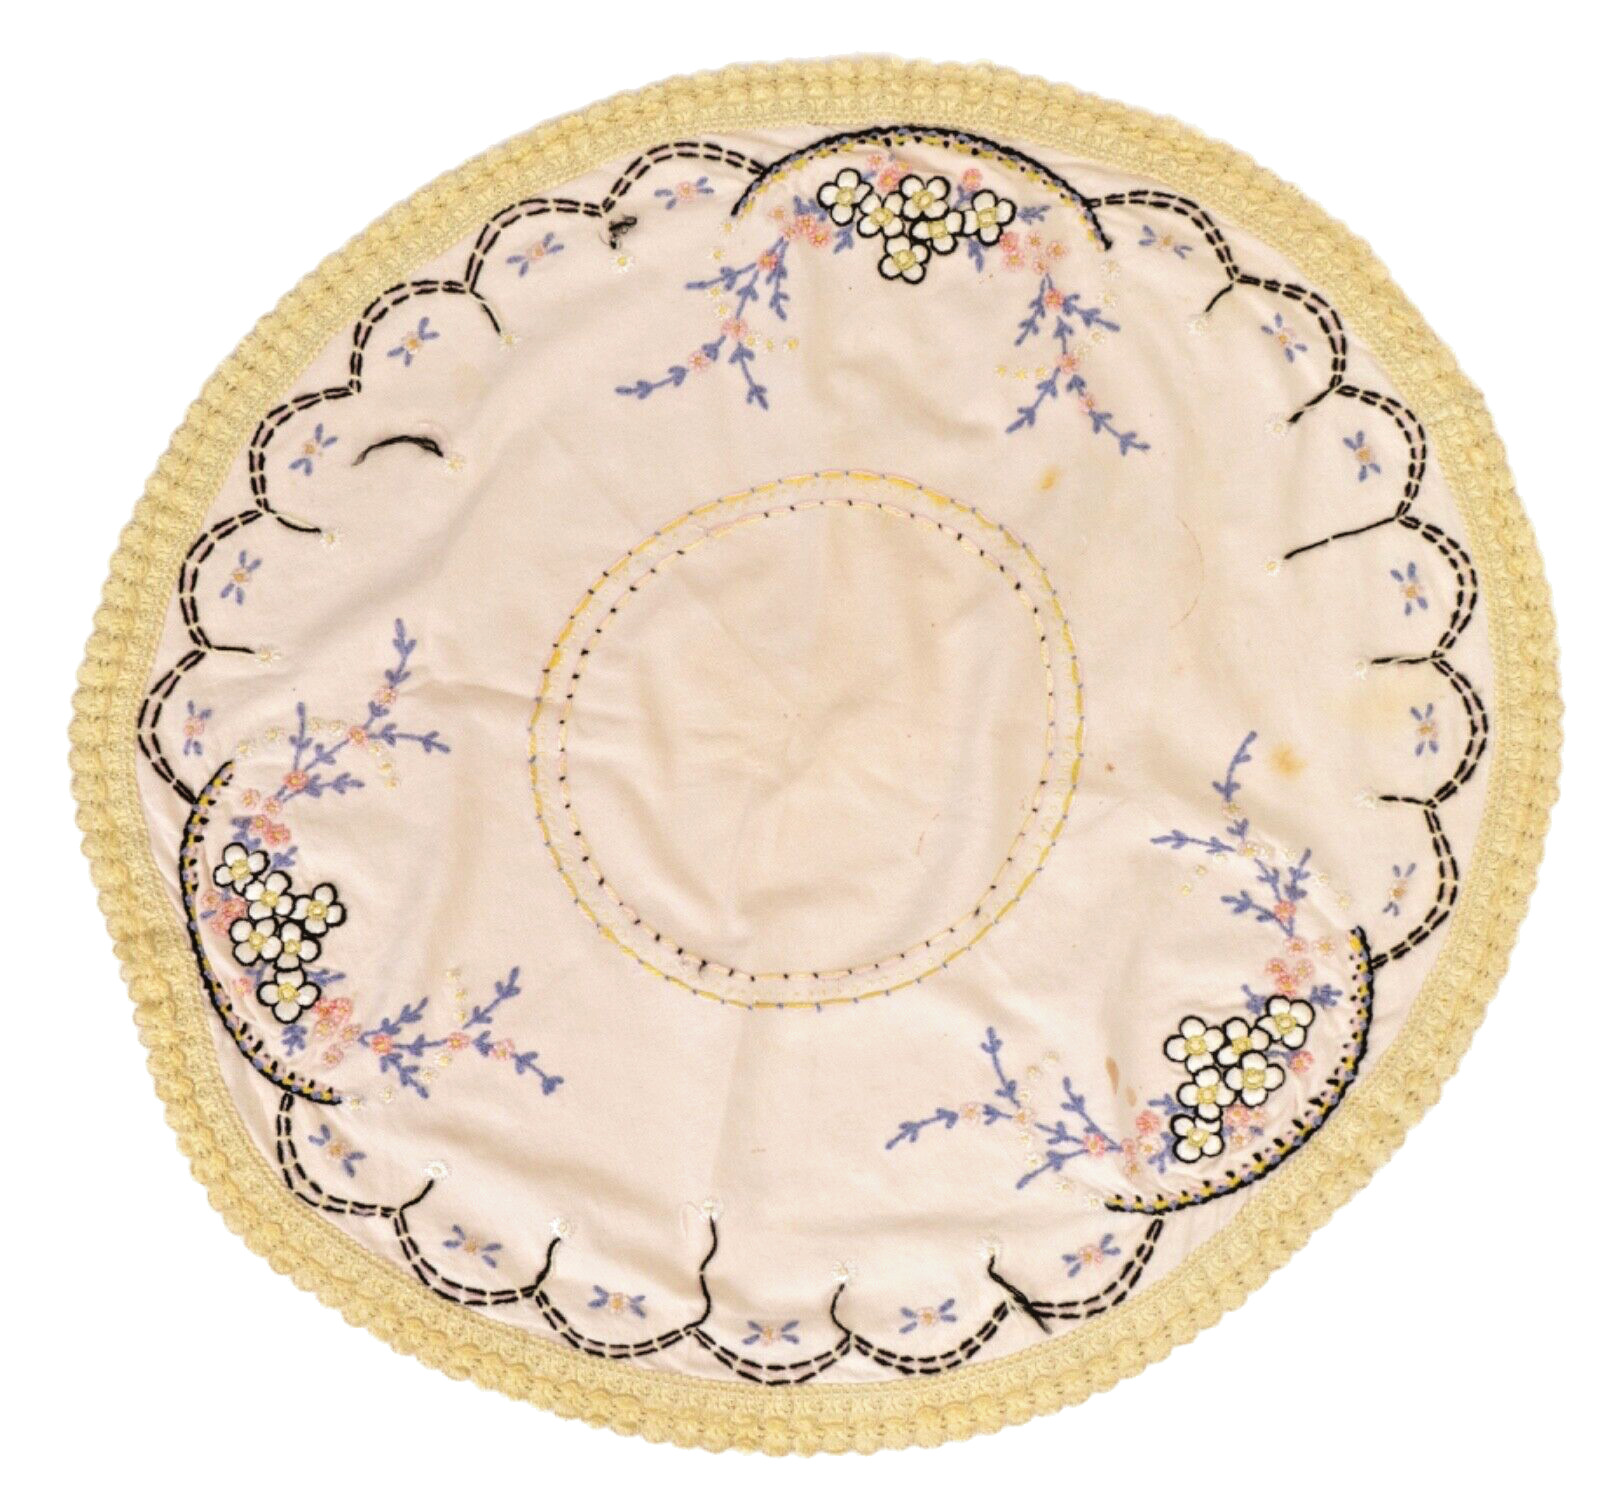 Vintage 1920s-30s Trapunto Embroidered Linen Round Charming Cottage Tablecloth